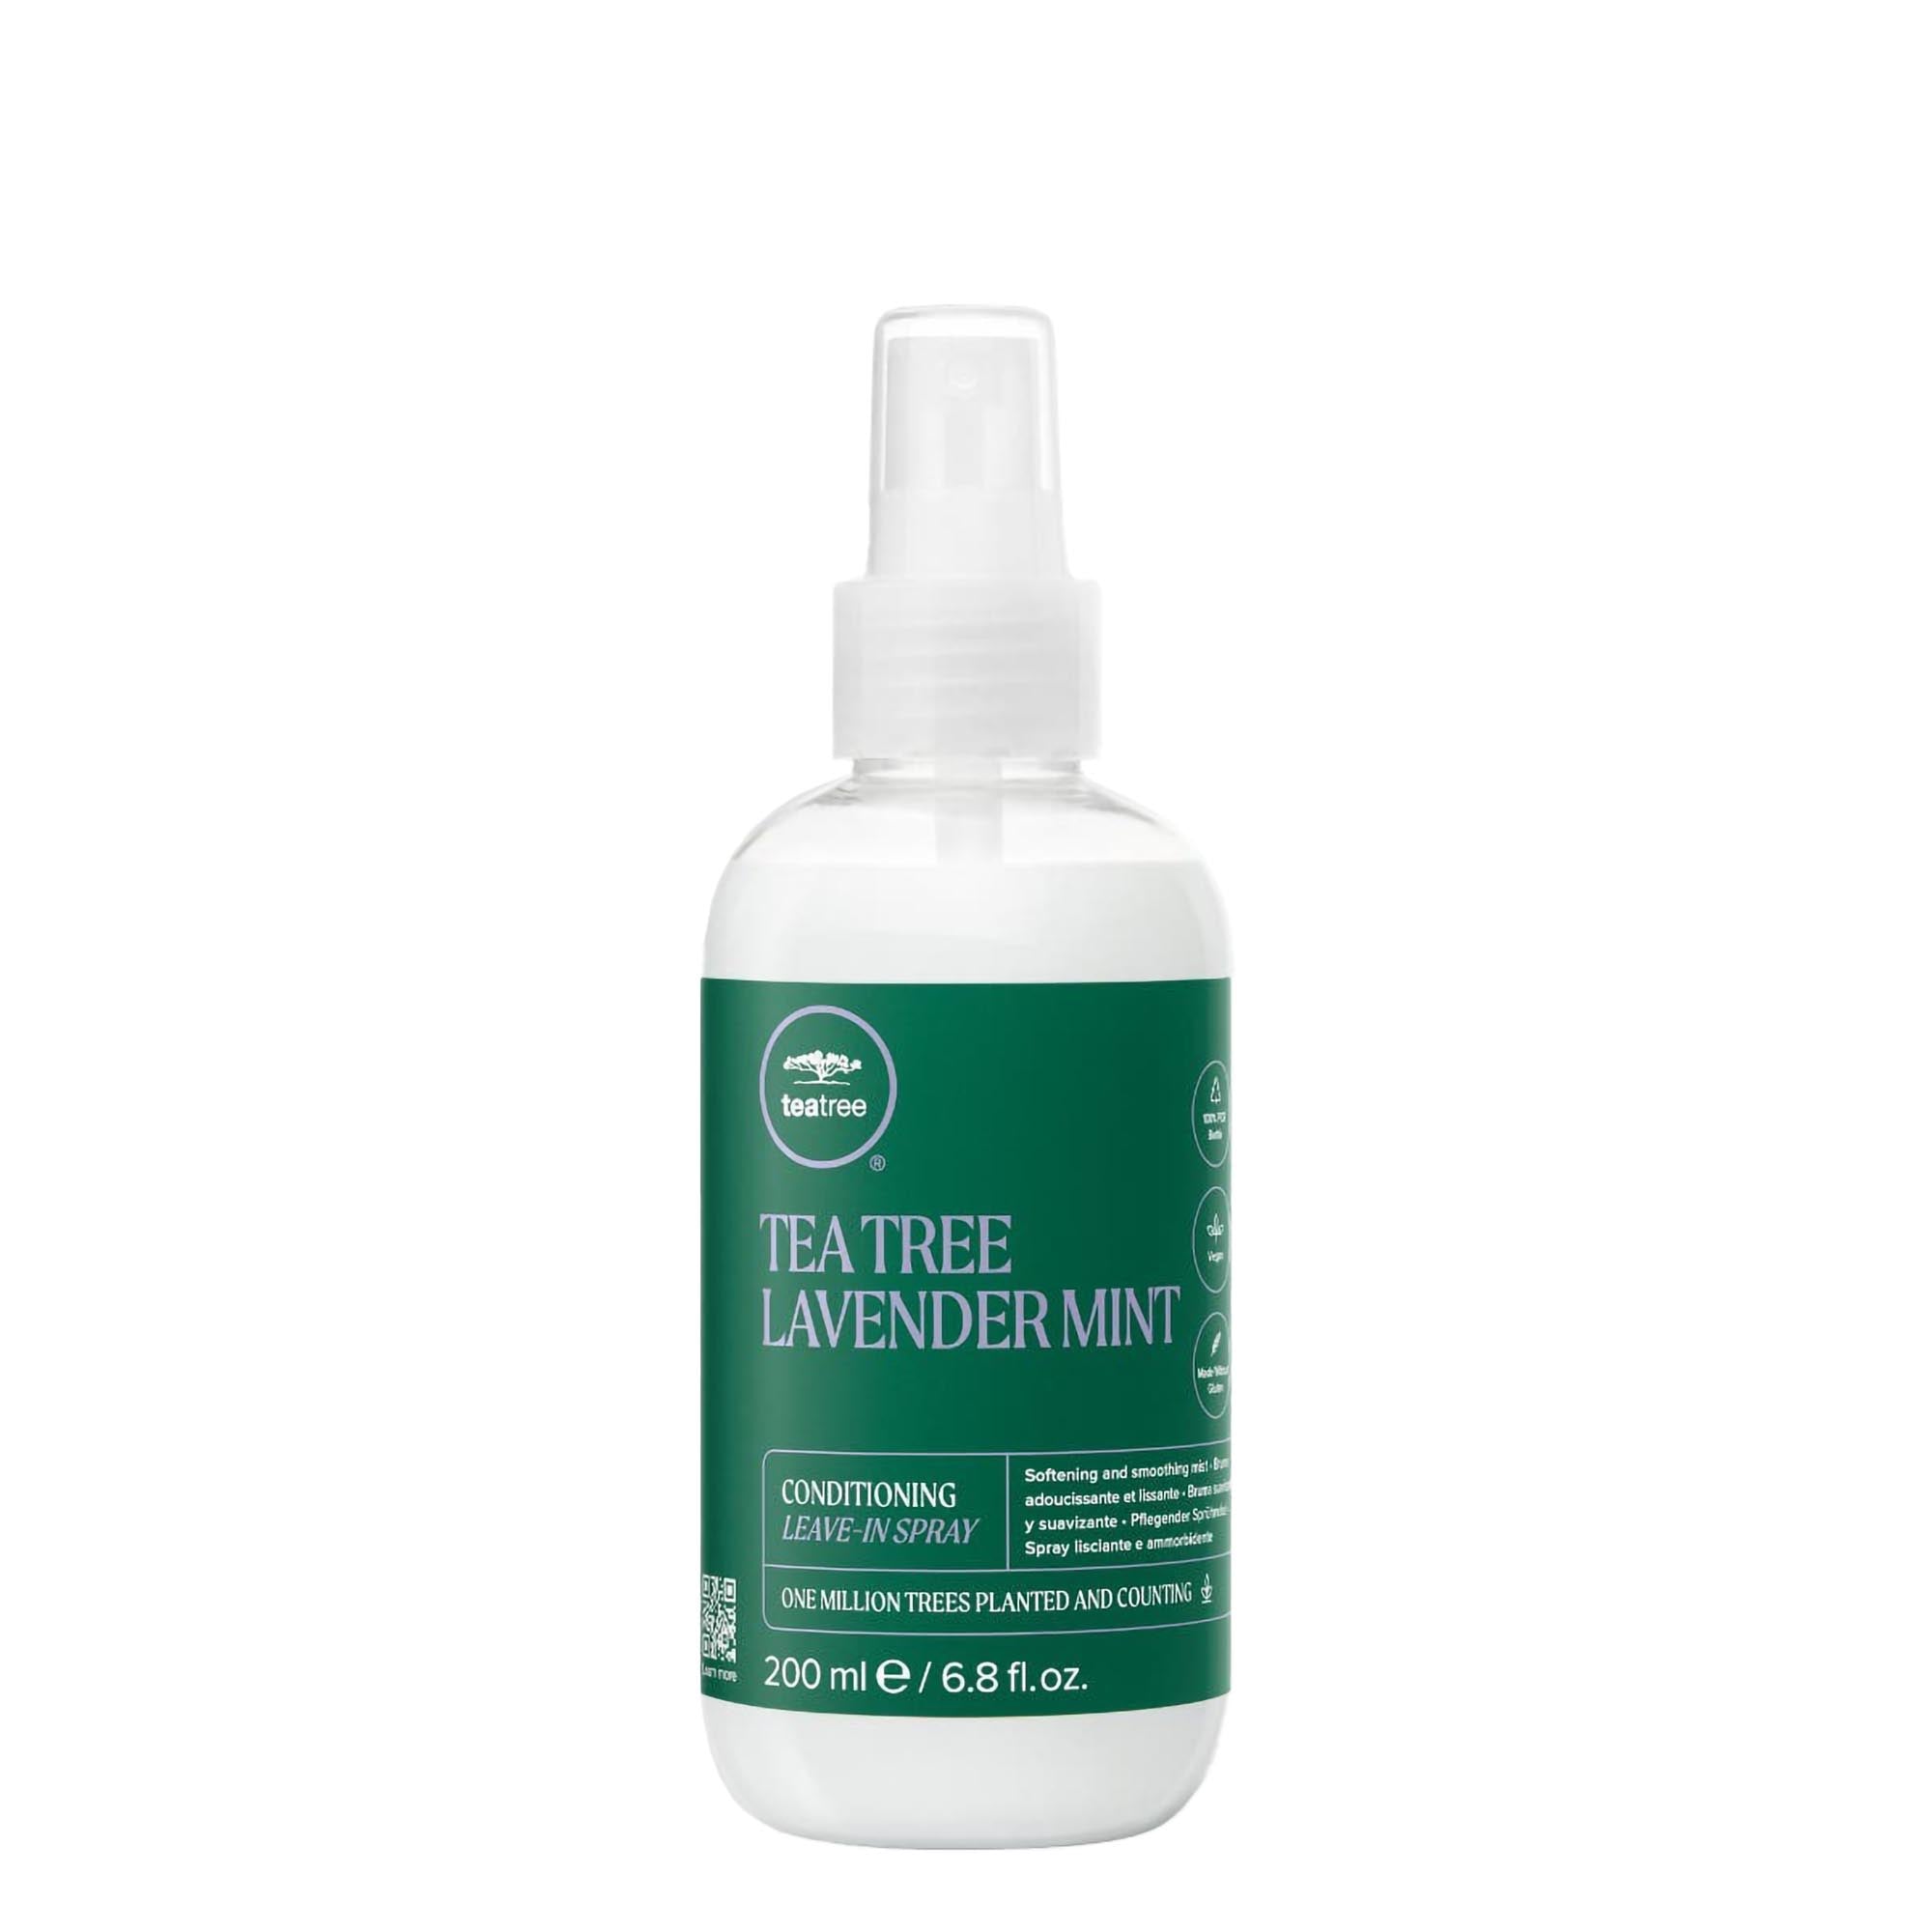 Paul Mitchell Tea Tree Lavender Mint Conditioning Leave-In Spray / 6.8OZ